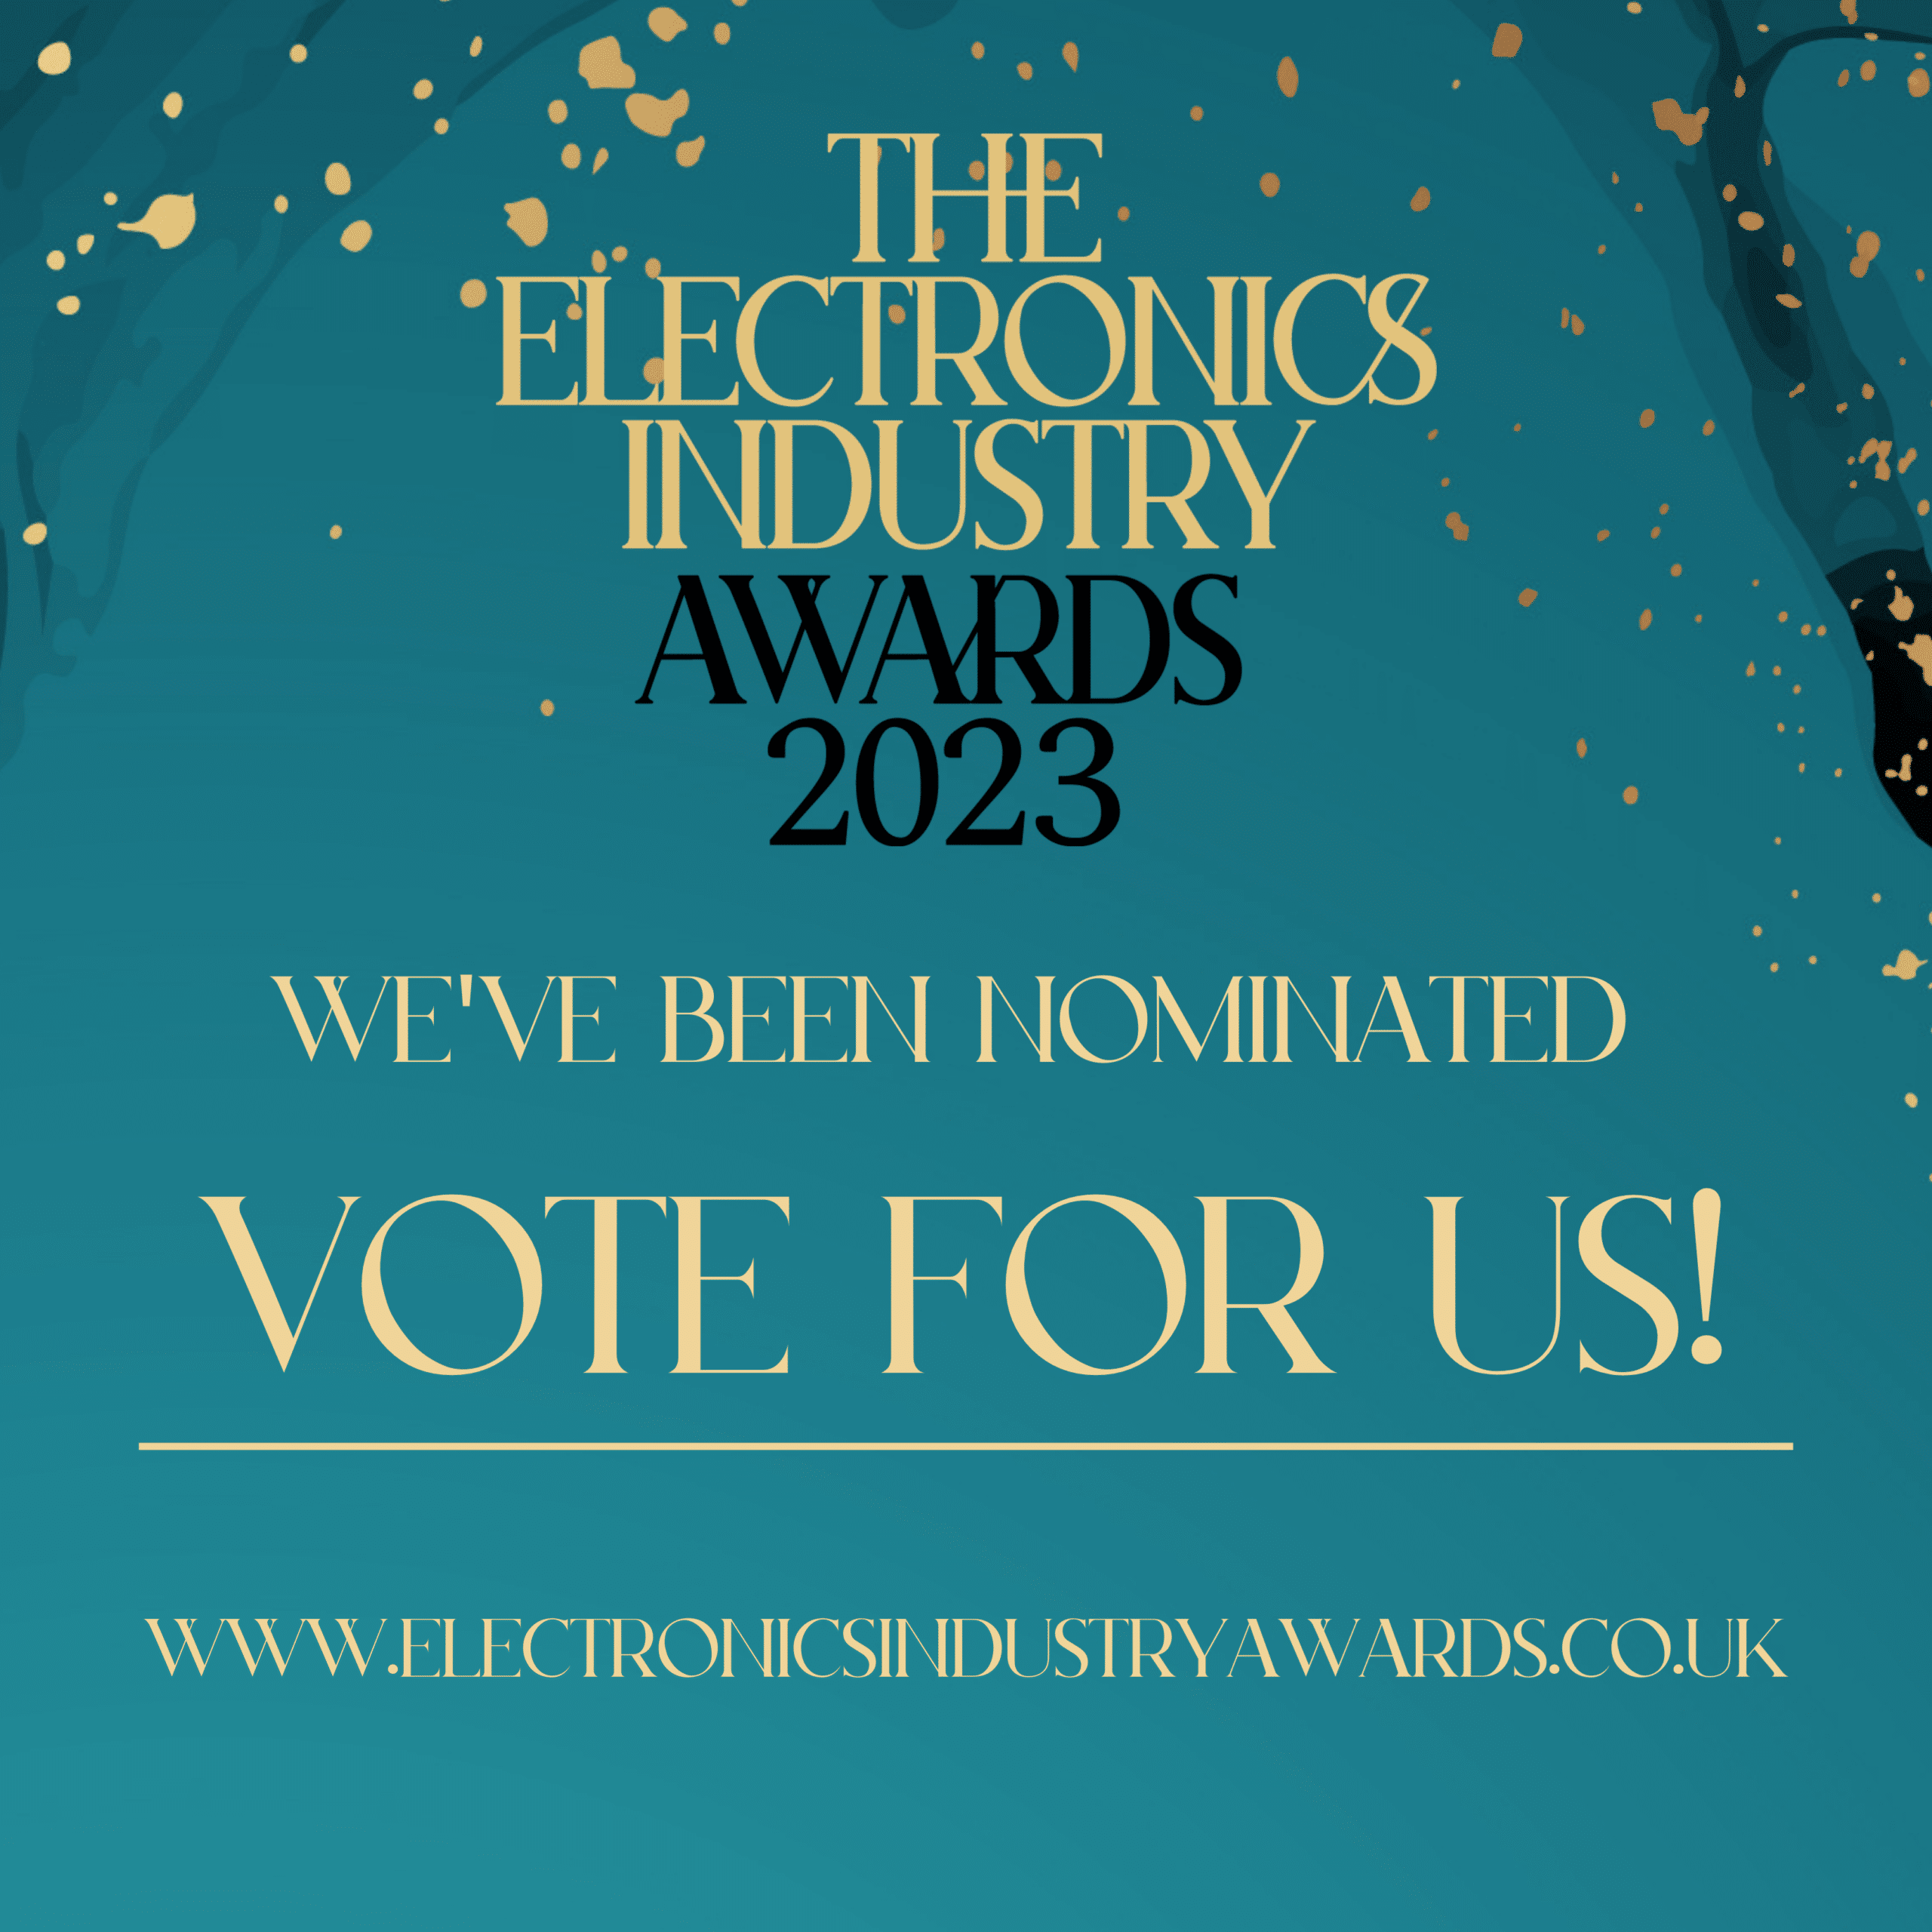 Napier Shortlisted For 2023 Electronics Industry Awards- Vote Now!